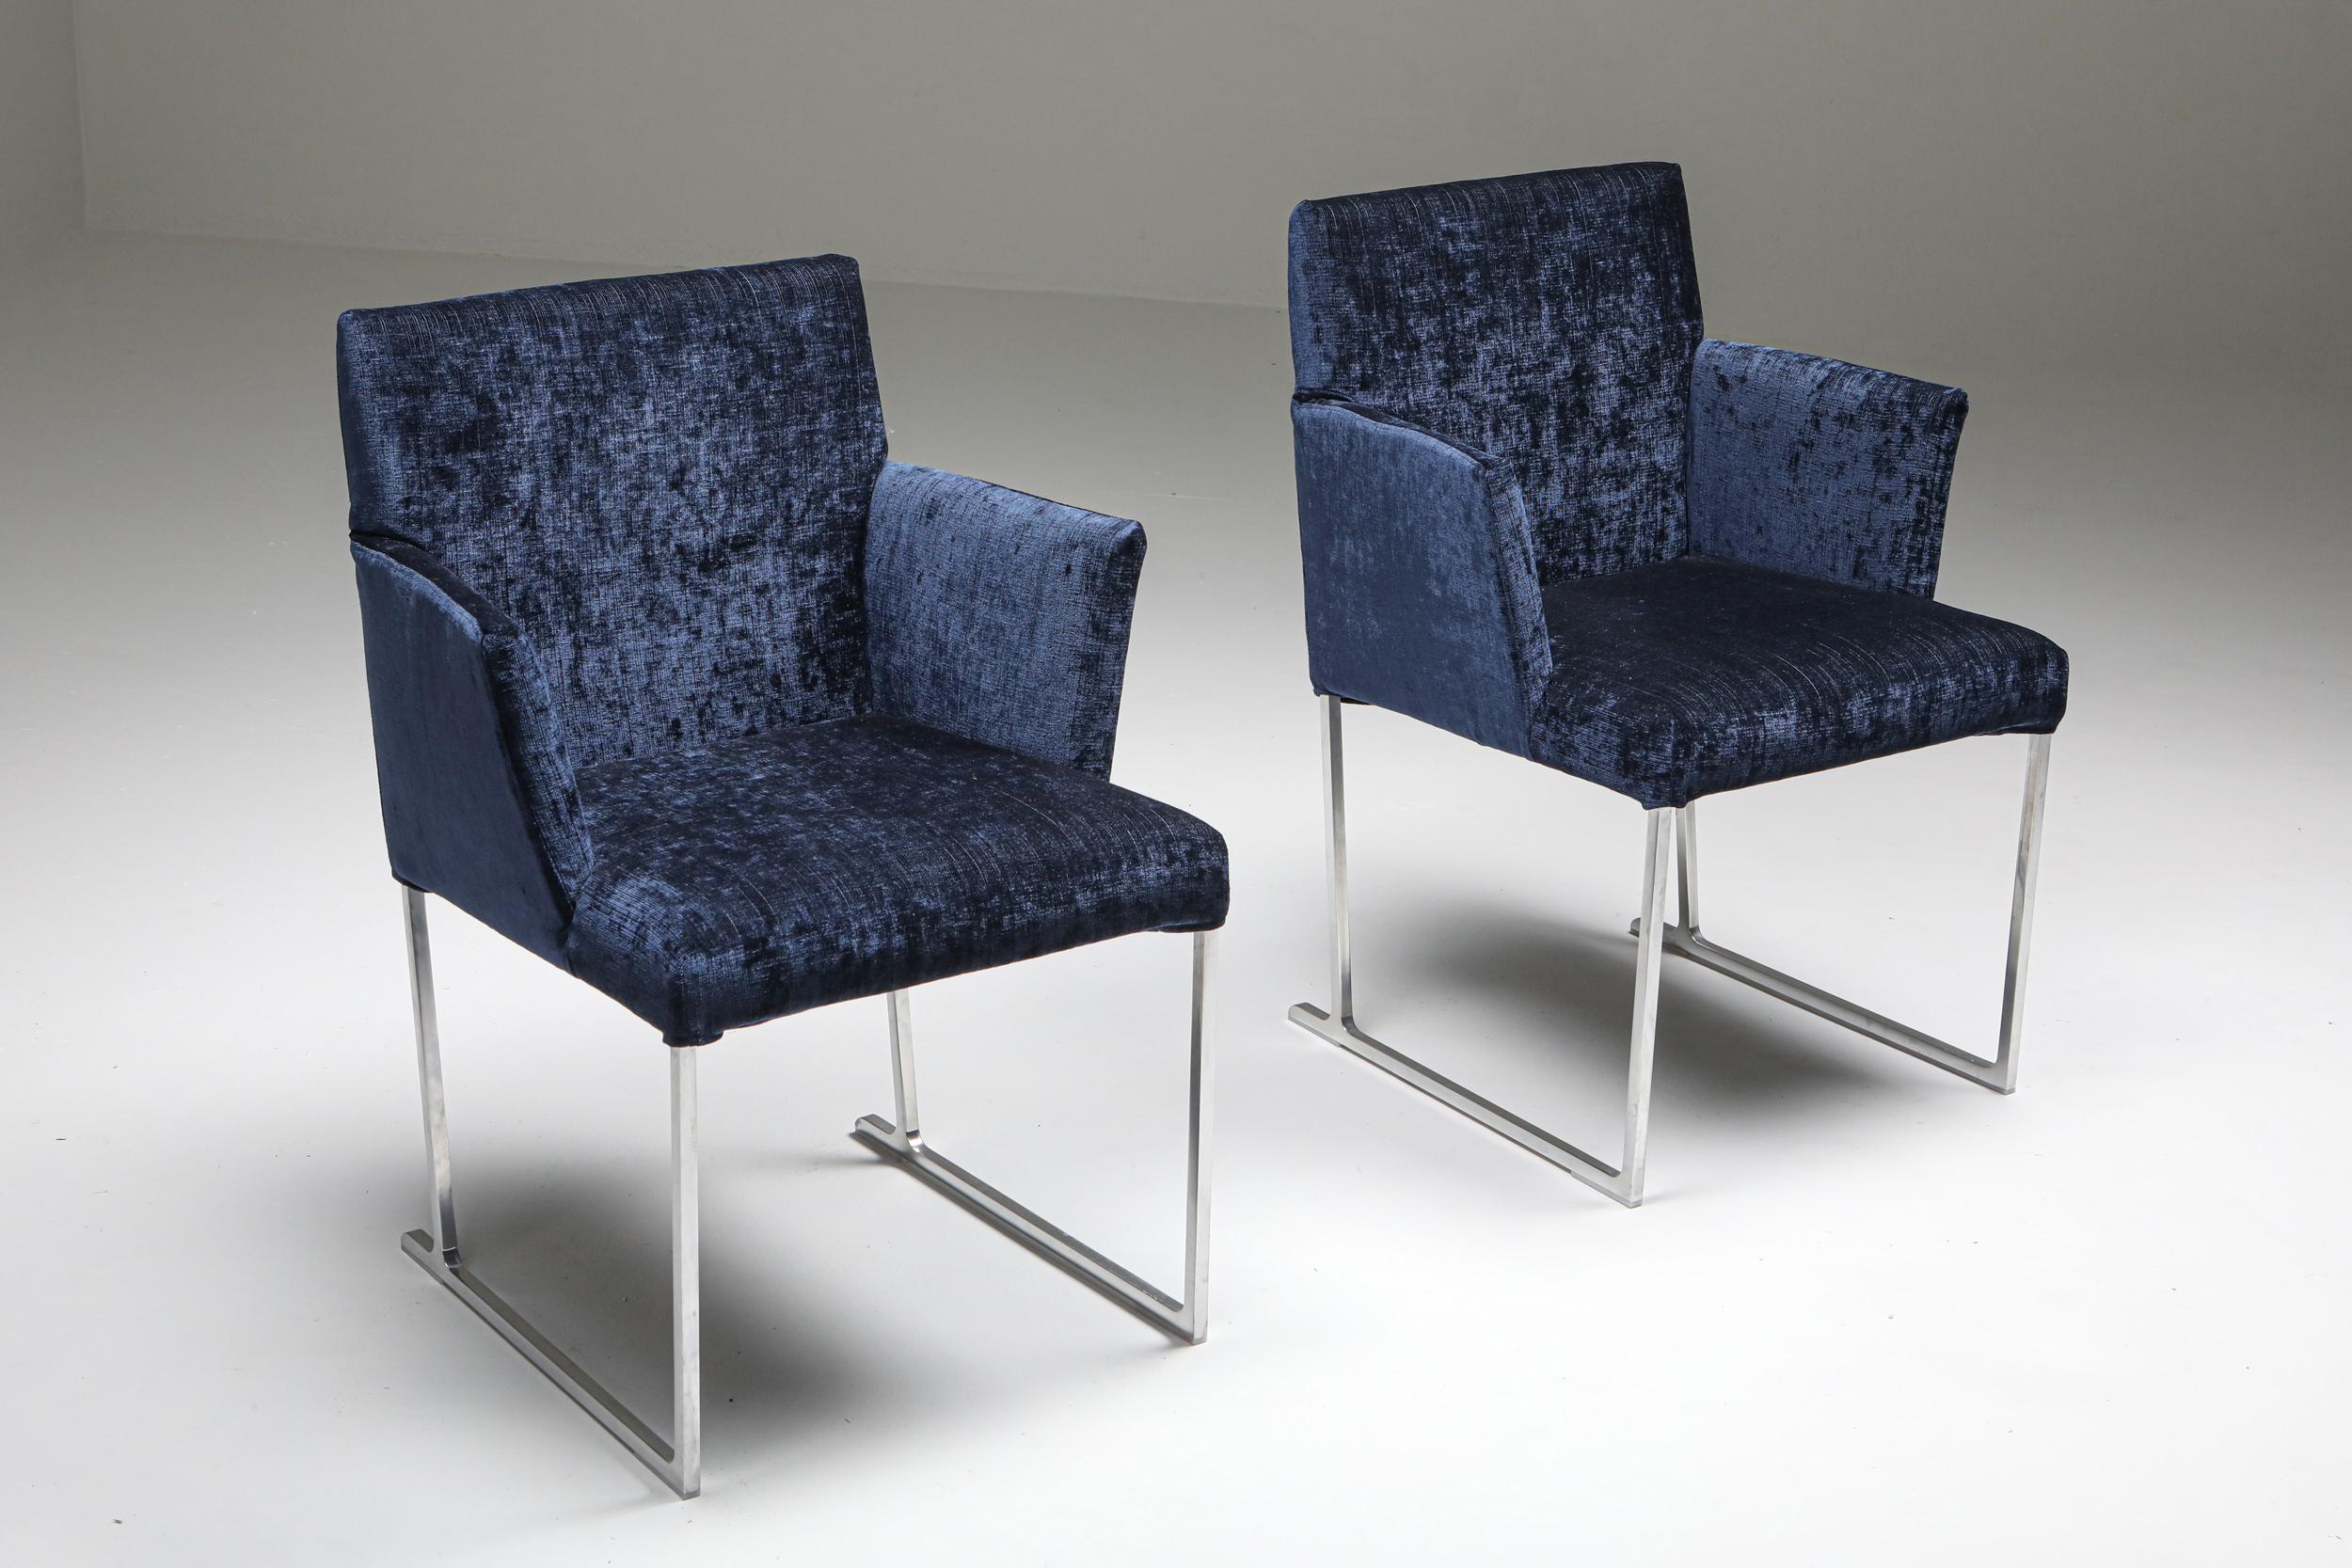 Contemporary Solo Chairs by Antonio Citterio for B&B Italia, Italy, 2000s For Sale